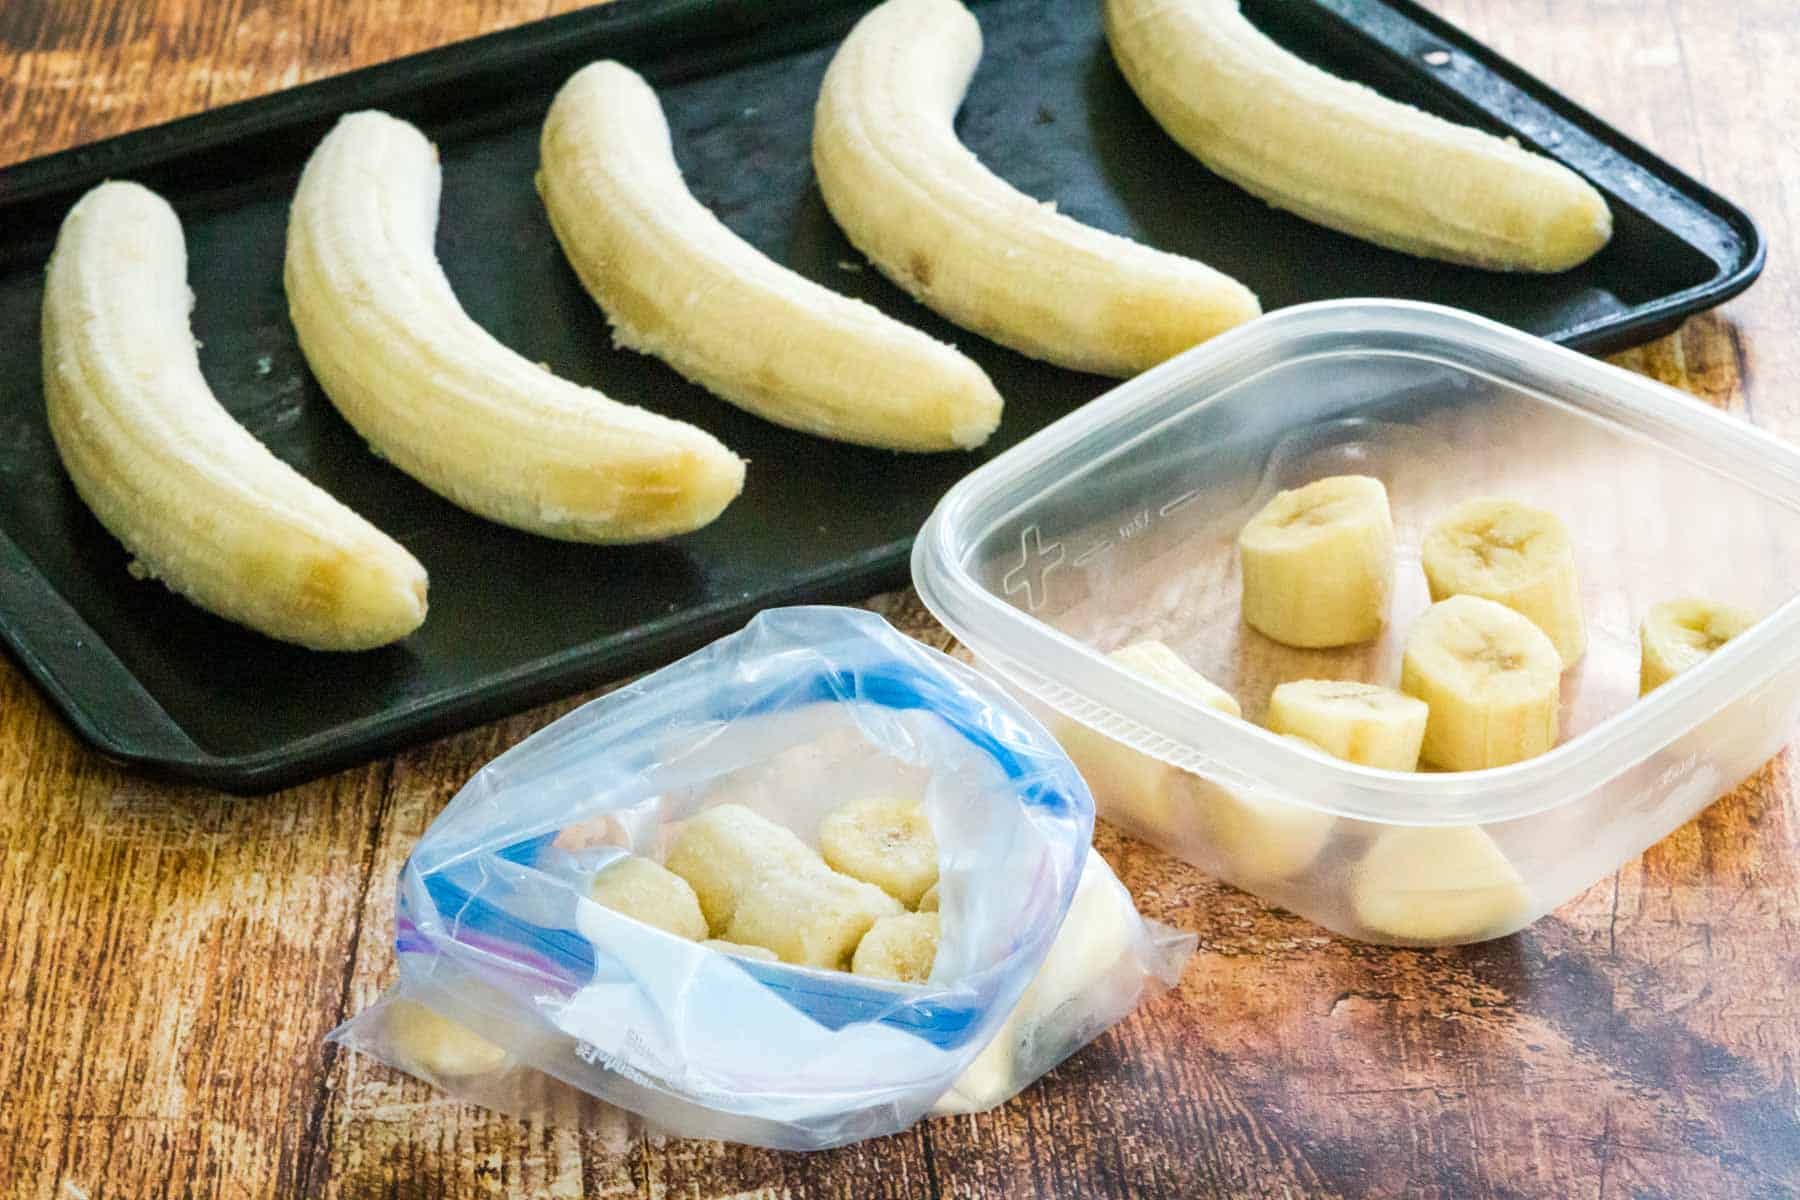 Five bananas without the peels lined up on a baking sheet next to a plastic container and a plastic baggie filled with sliced banana